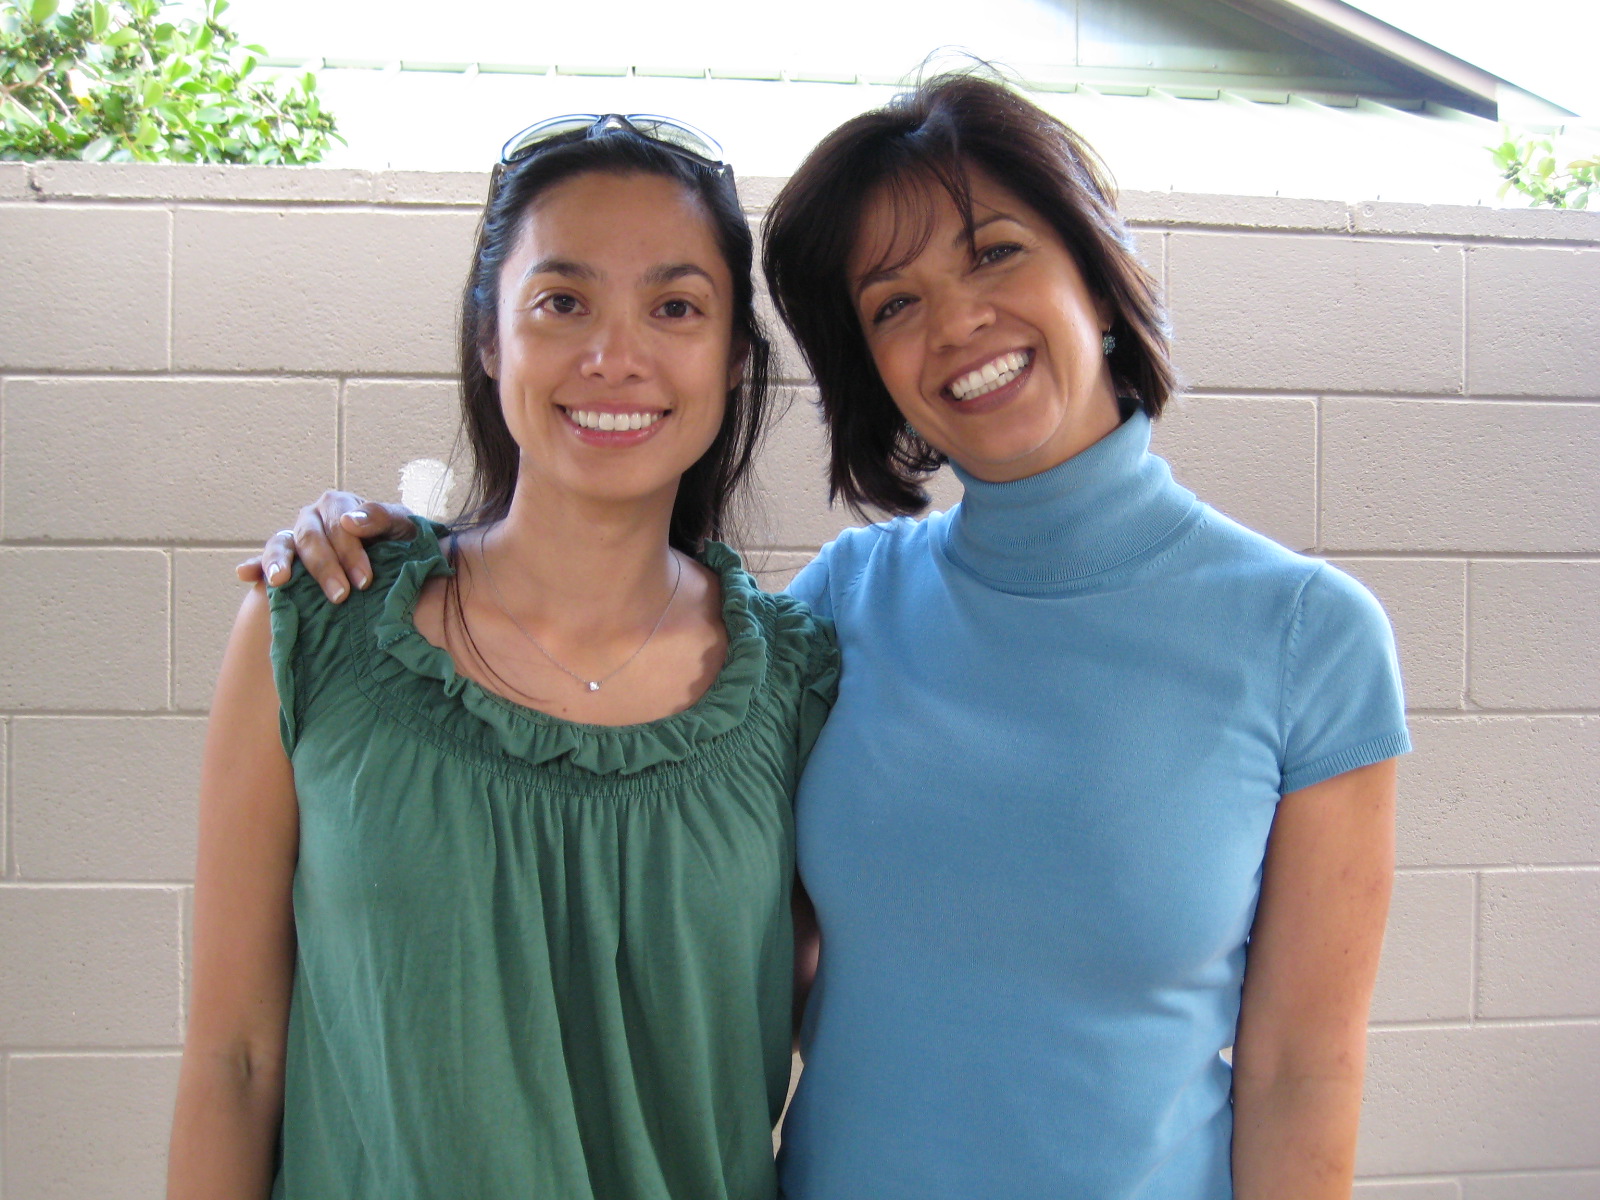 On the set of The Descendants, Kim played role of School Counselor Dr. Thull